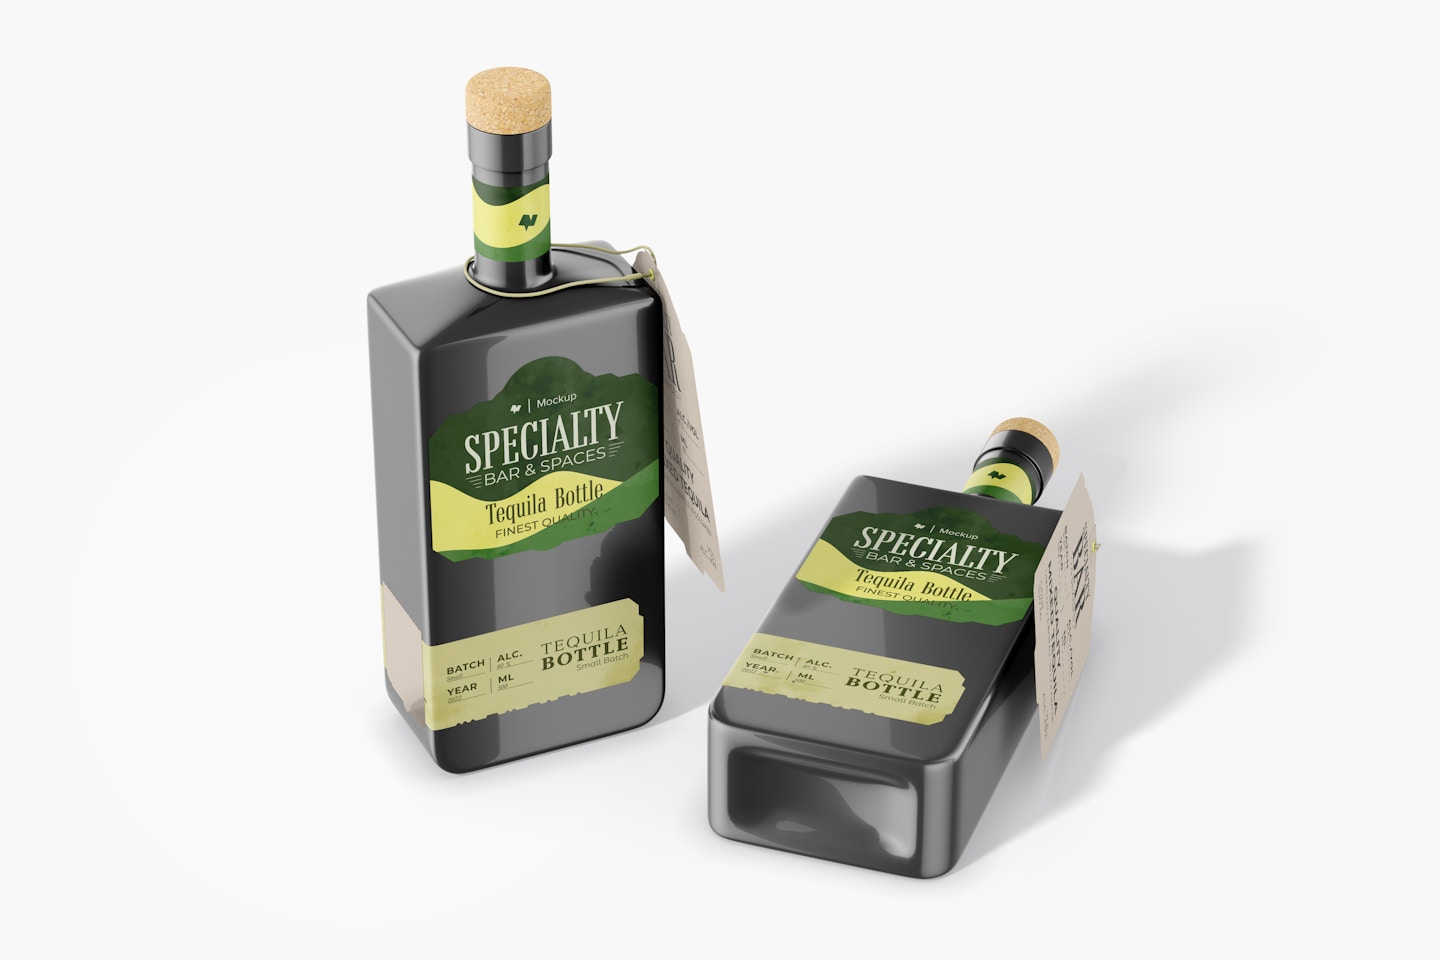 Dark Square Tequila Bottles, Standing and Dropped